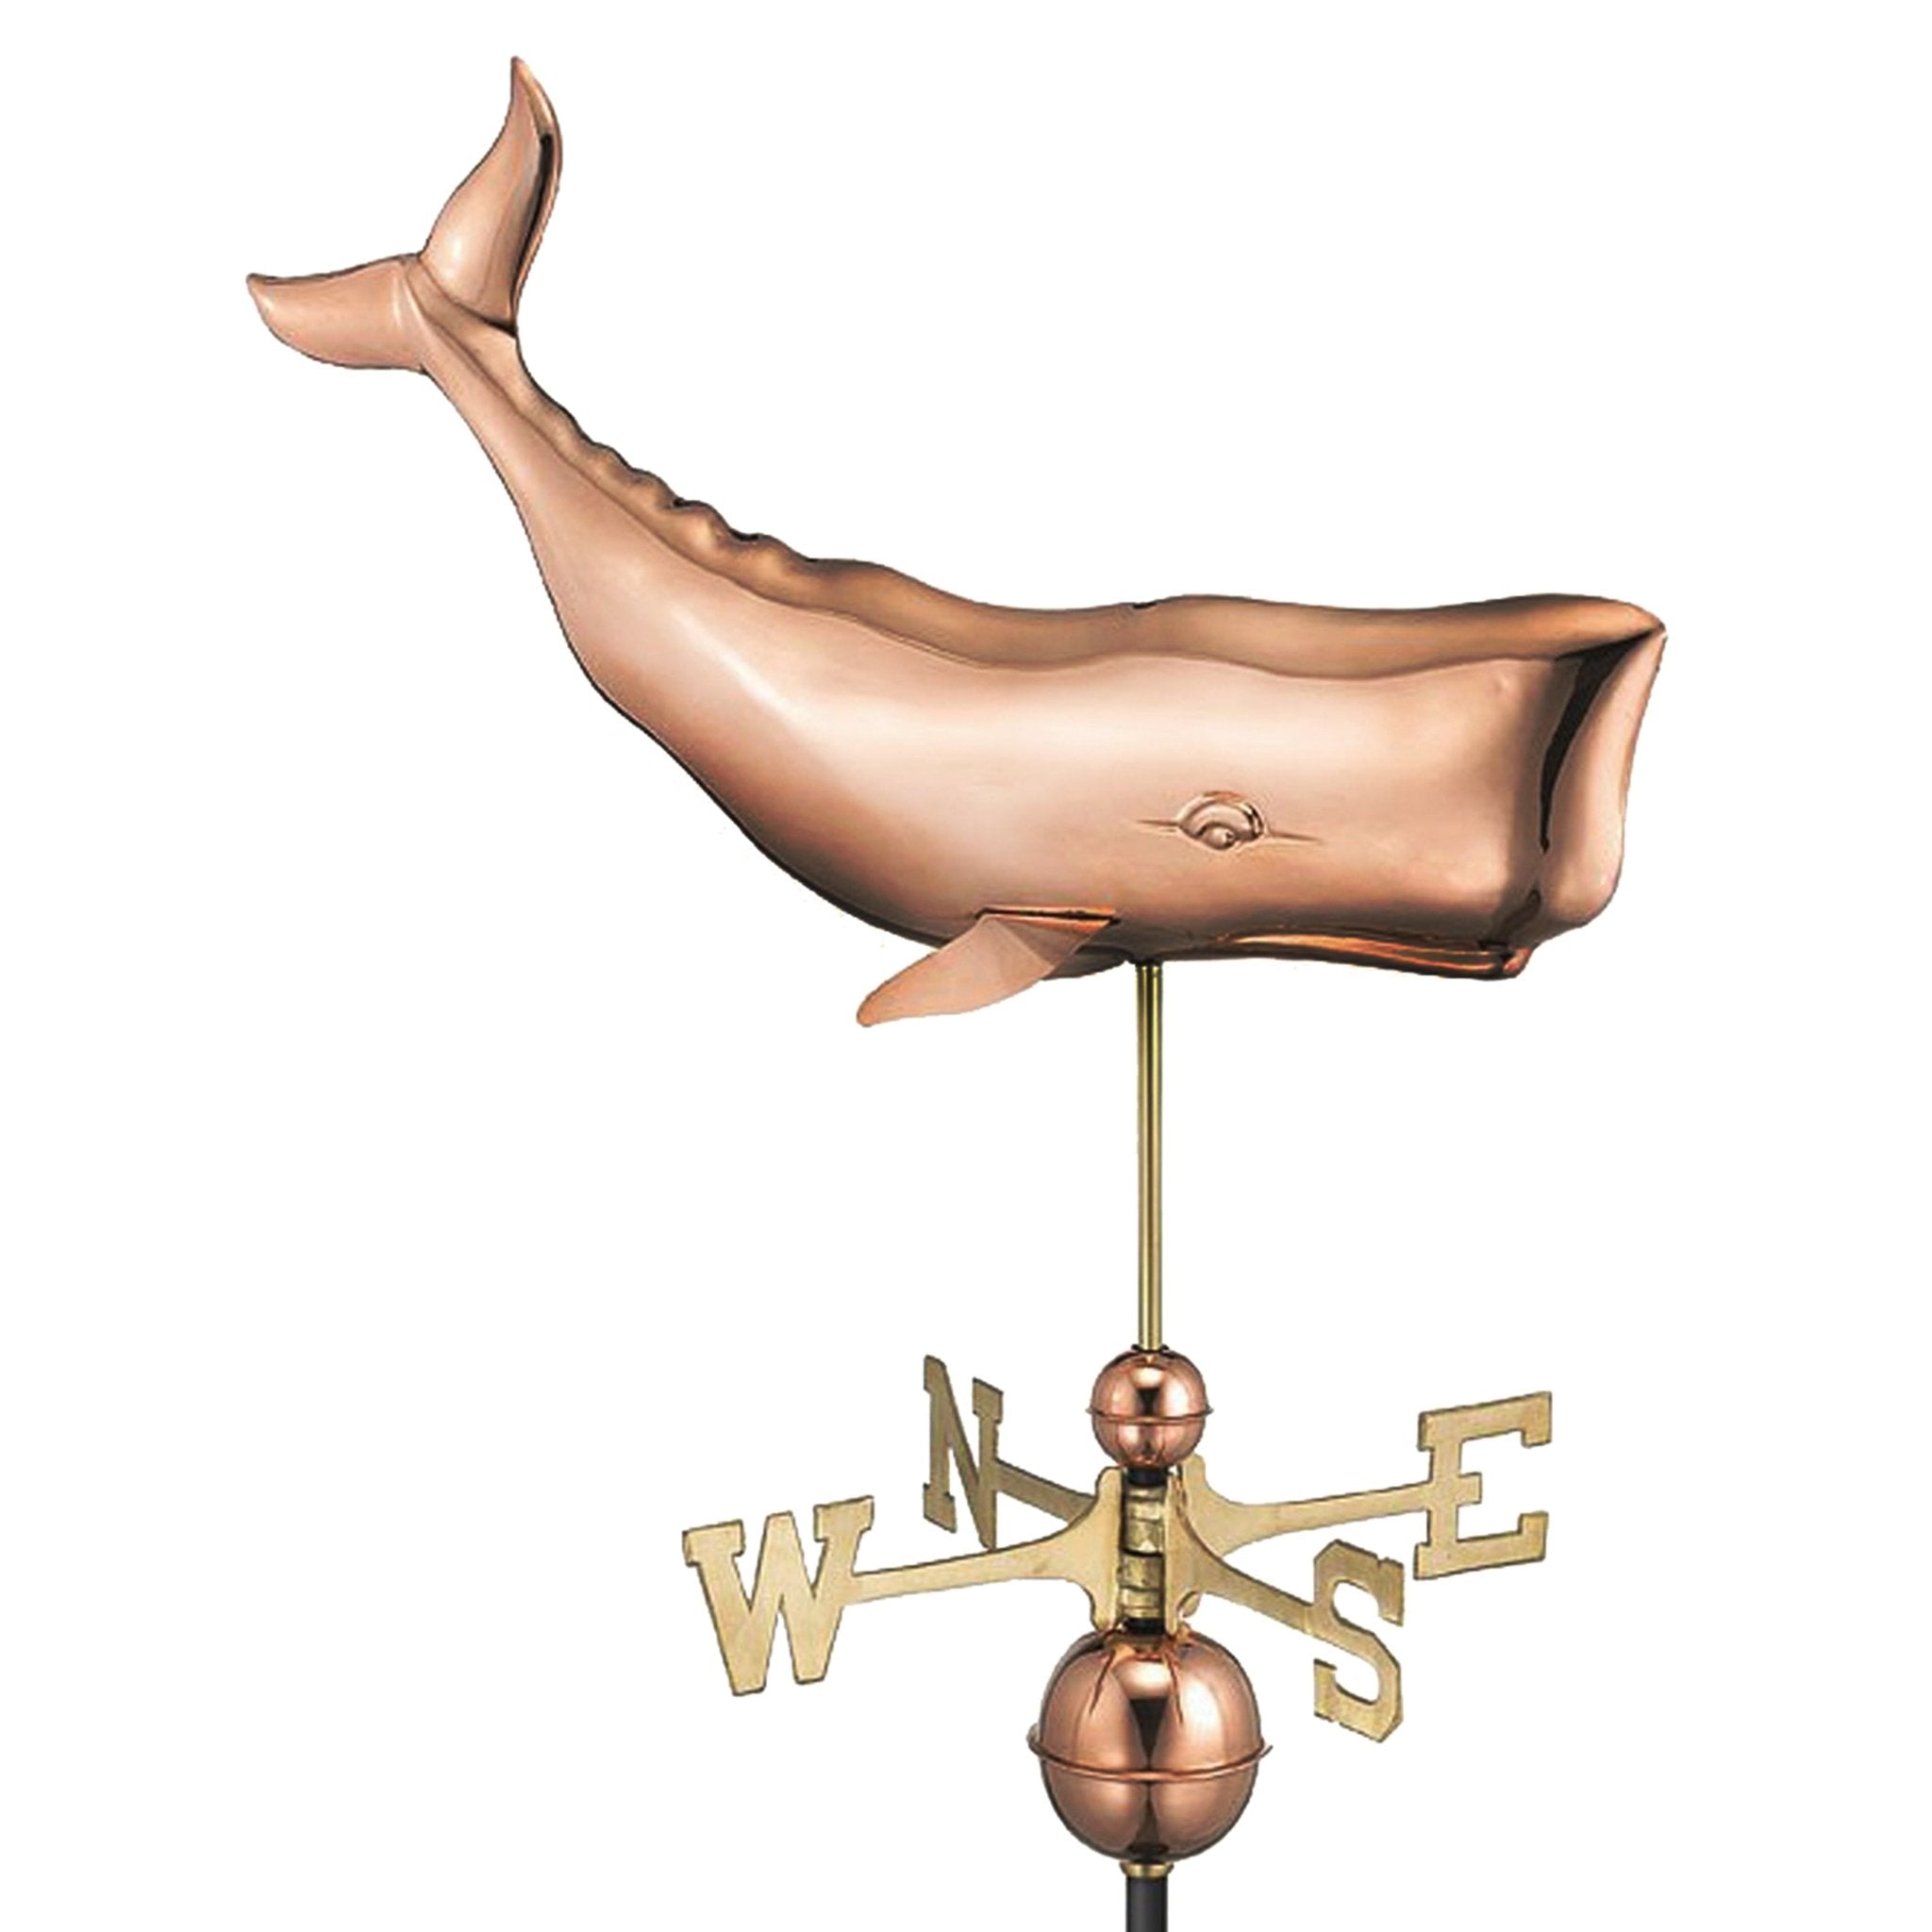 28" Whale Weathervane - Good Directions